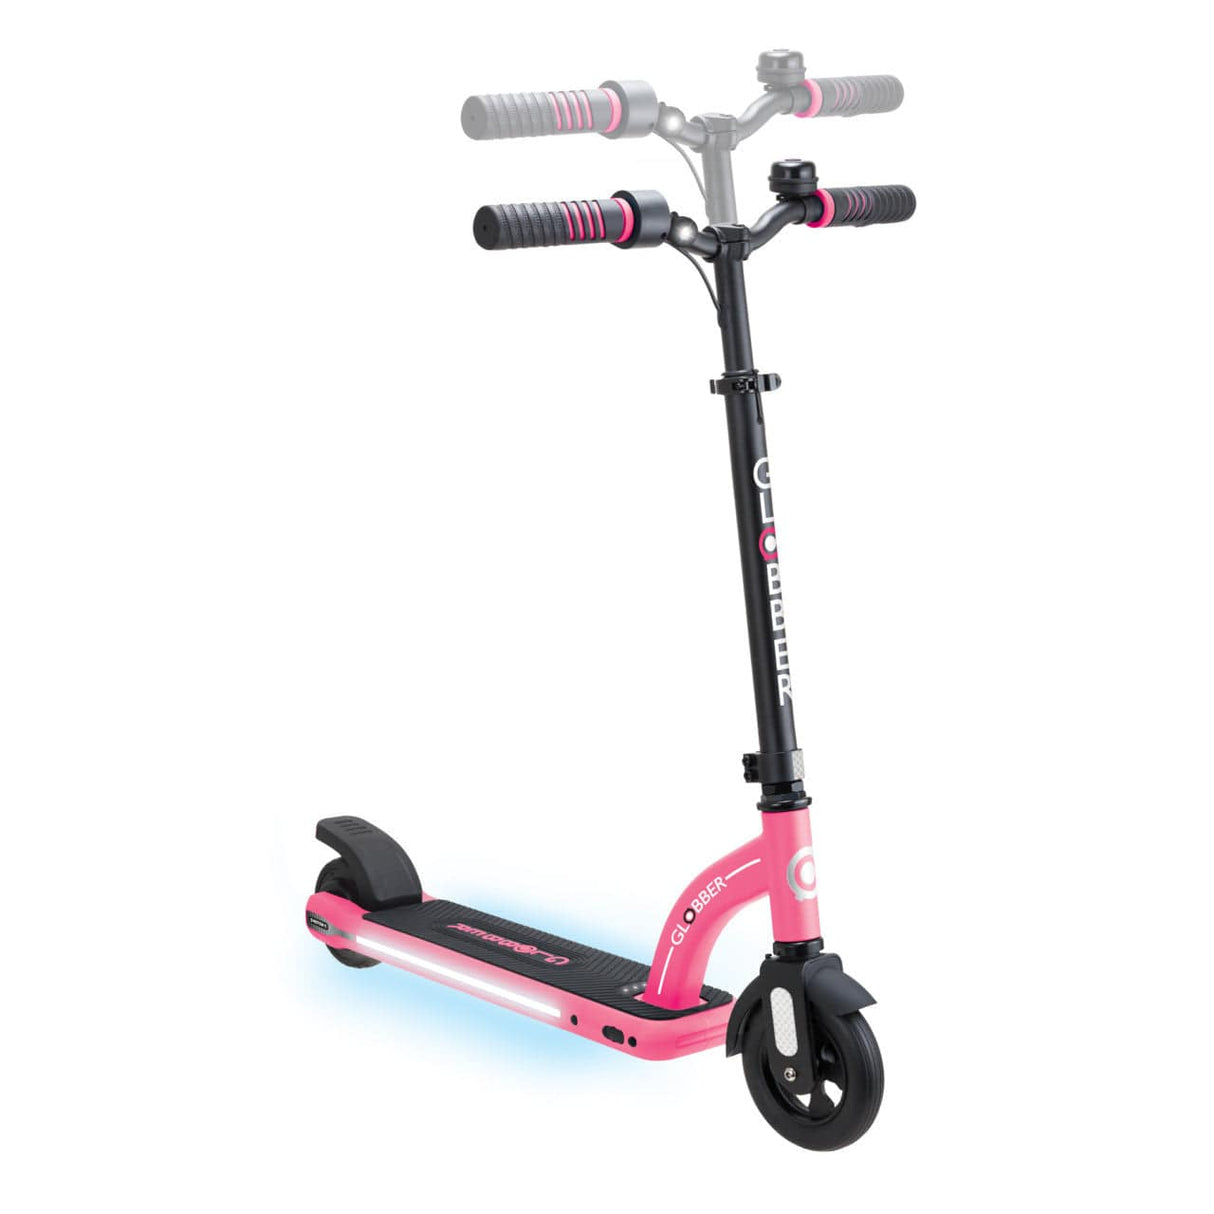 Globber E-Motion 11 Kids/Teens Electric Scooter Fuschsia Pink